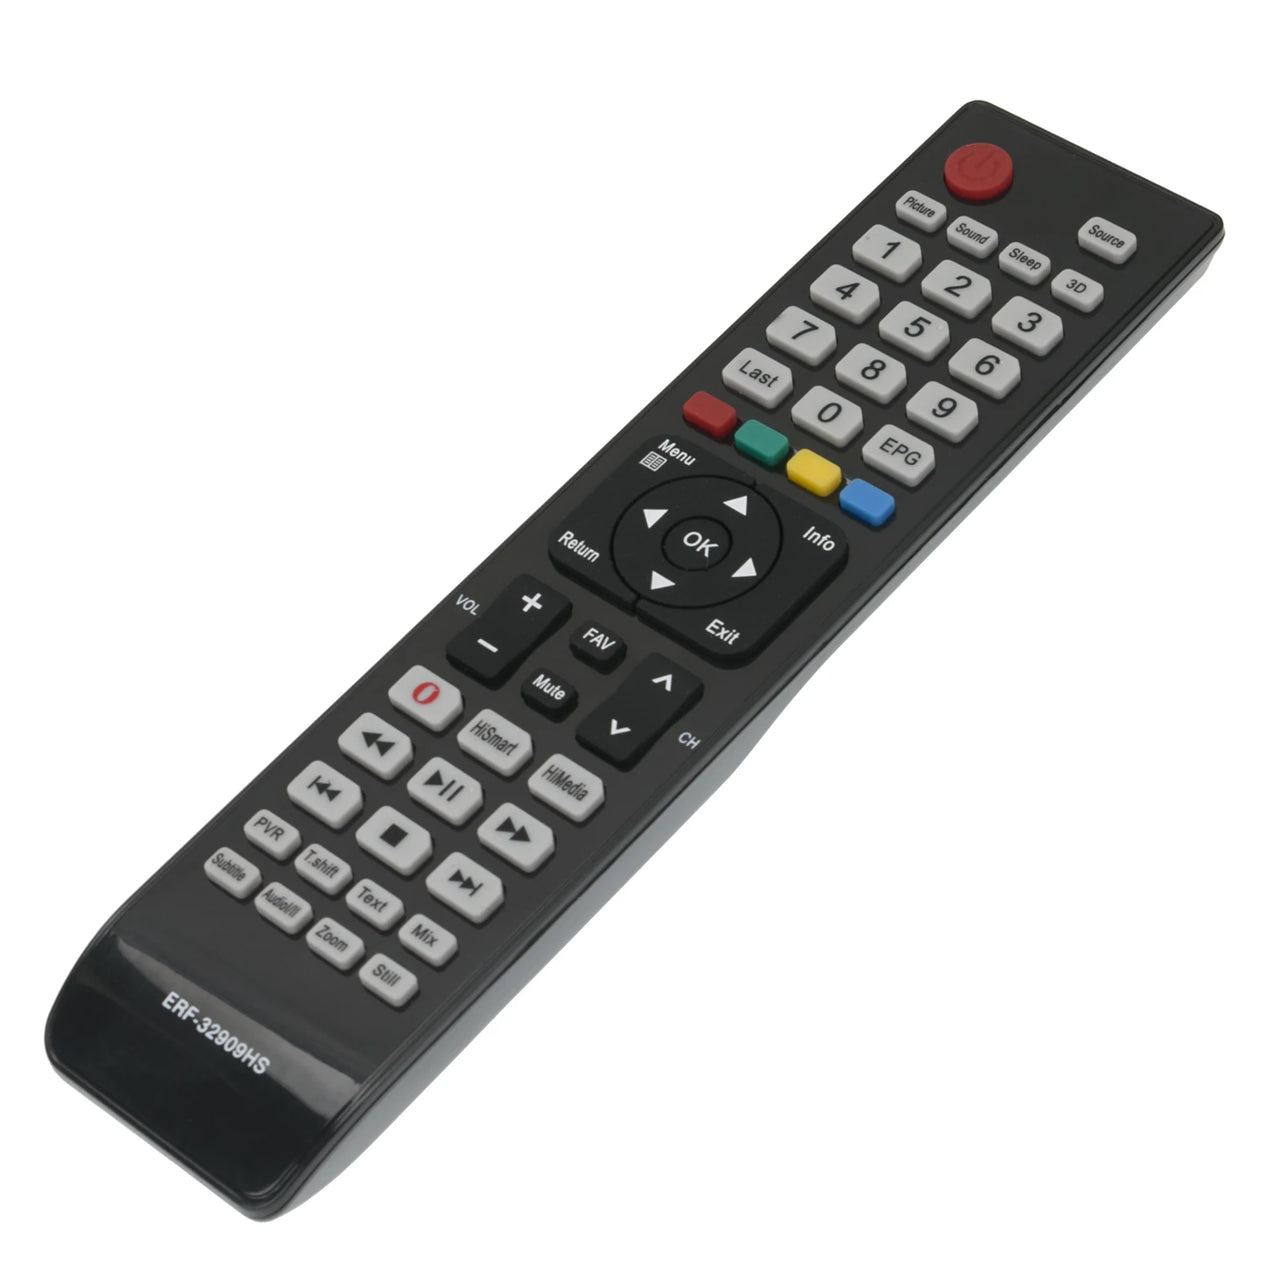 ERF-32909HS Replacement Remote for Hisense Televisions